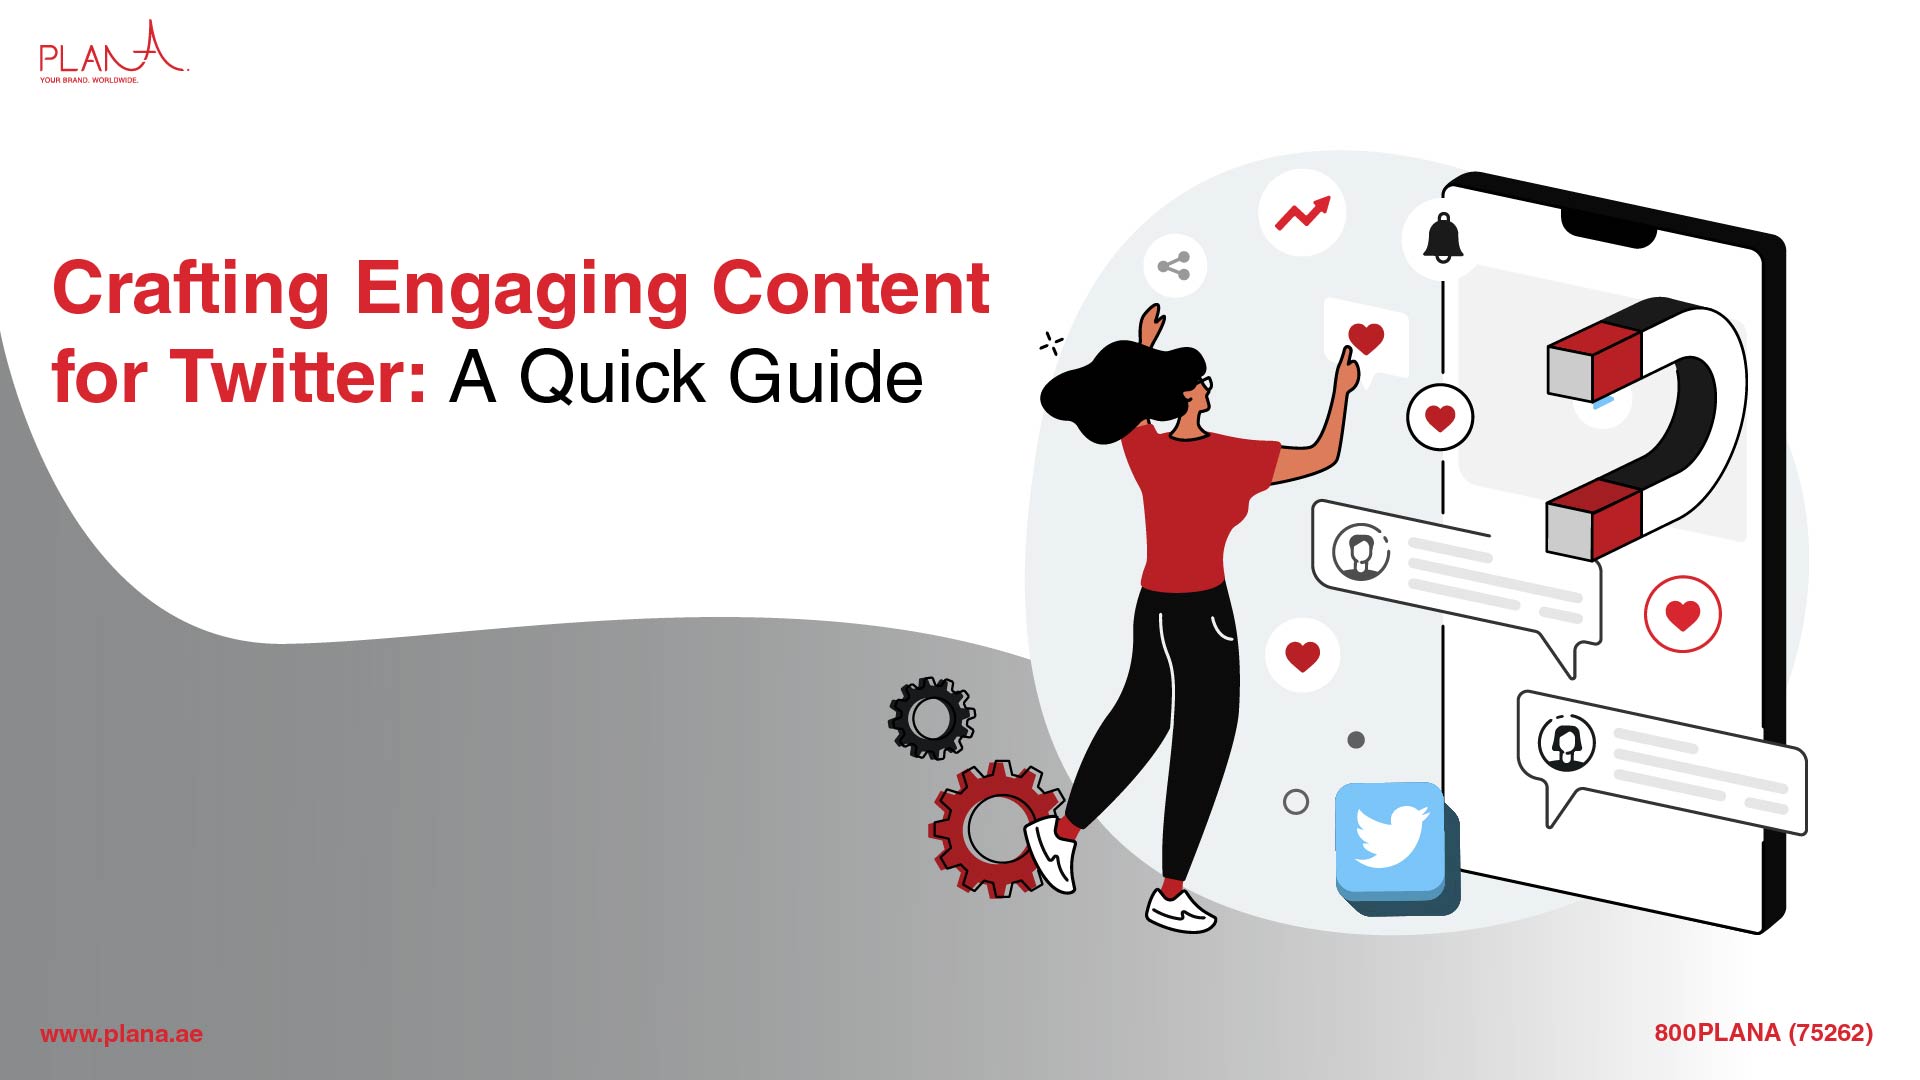 Crafting Engaging Content for Twitter: A Quick Guide